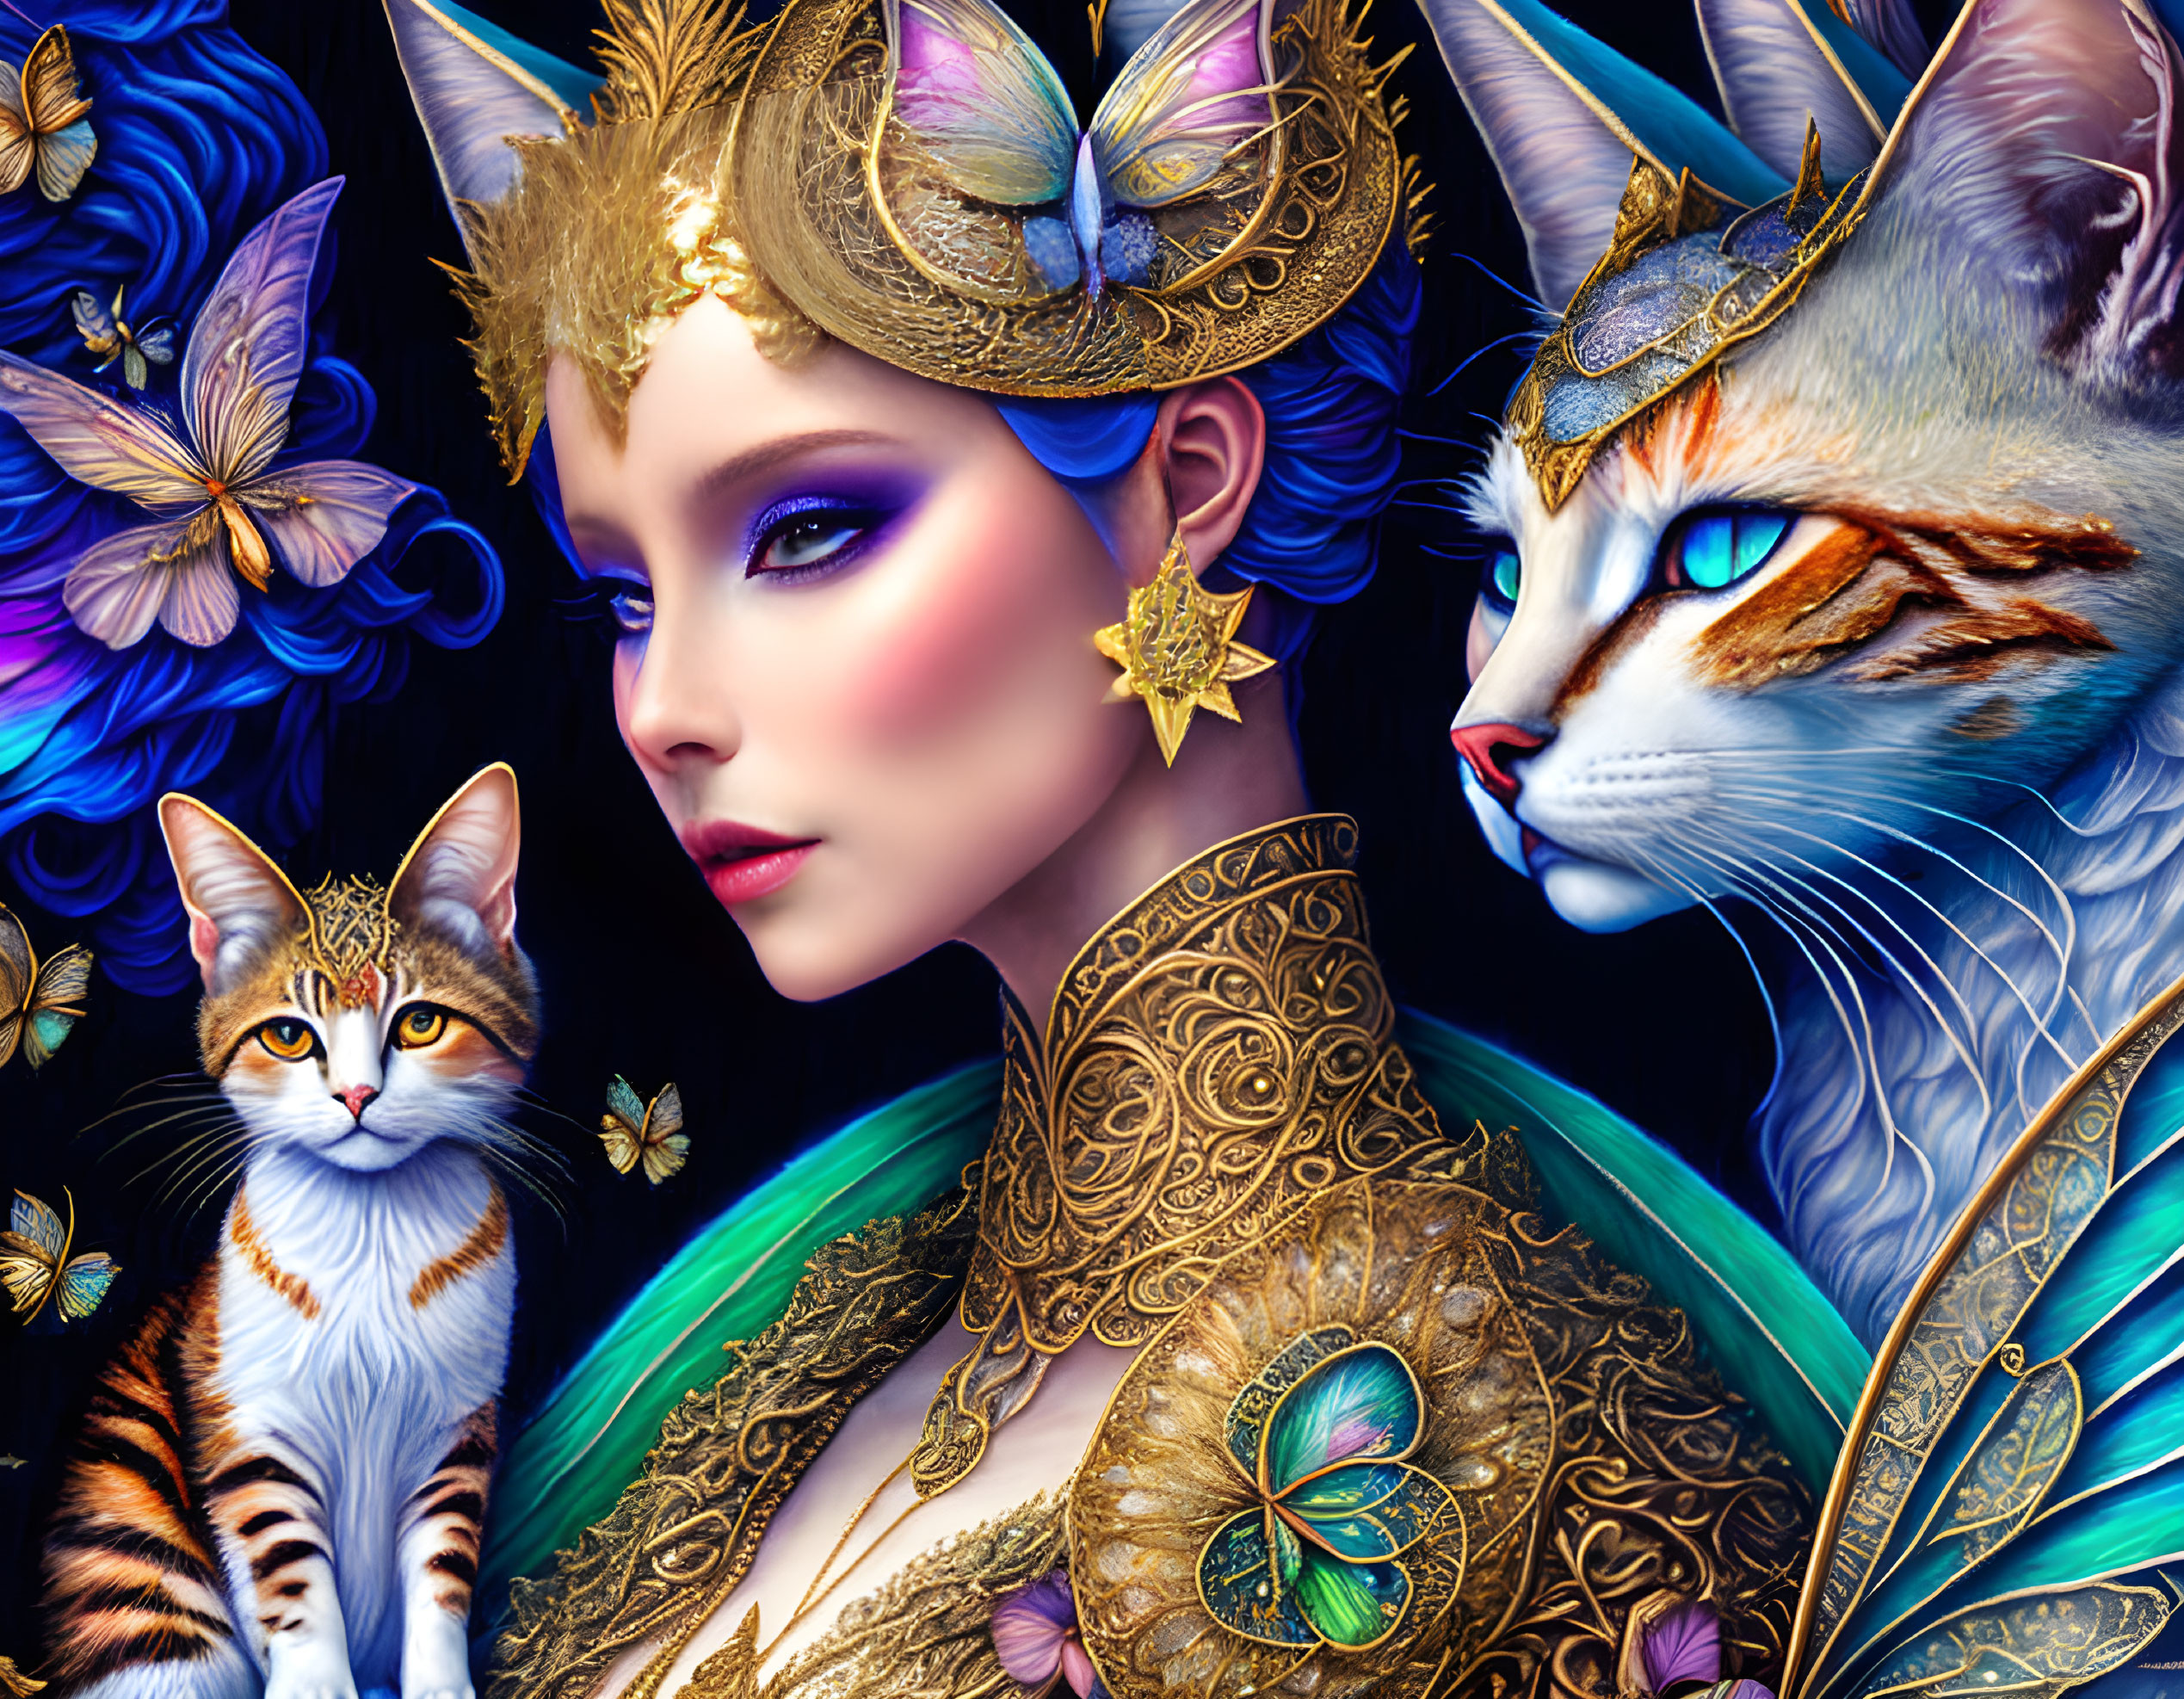 Colorful artwork of woman with striking makeup and golden accessories, orange tabby cat, and majestic blue